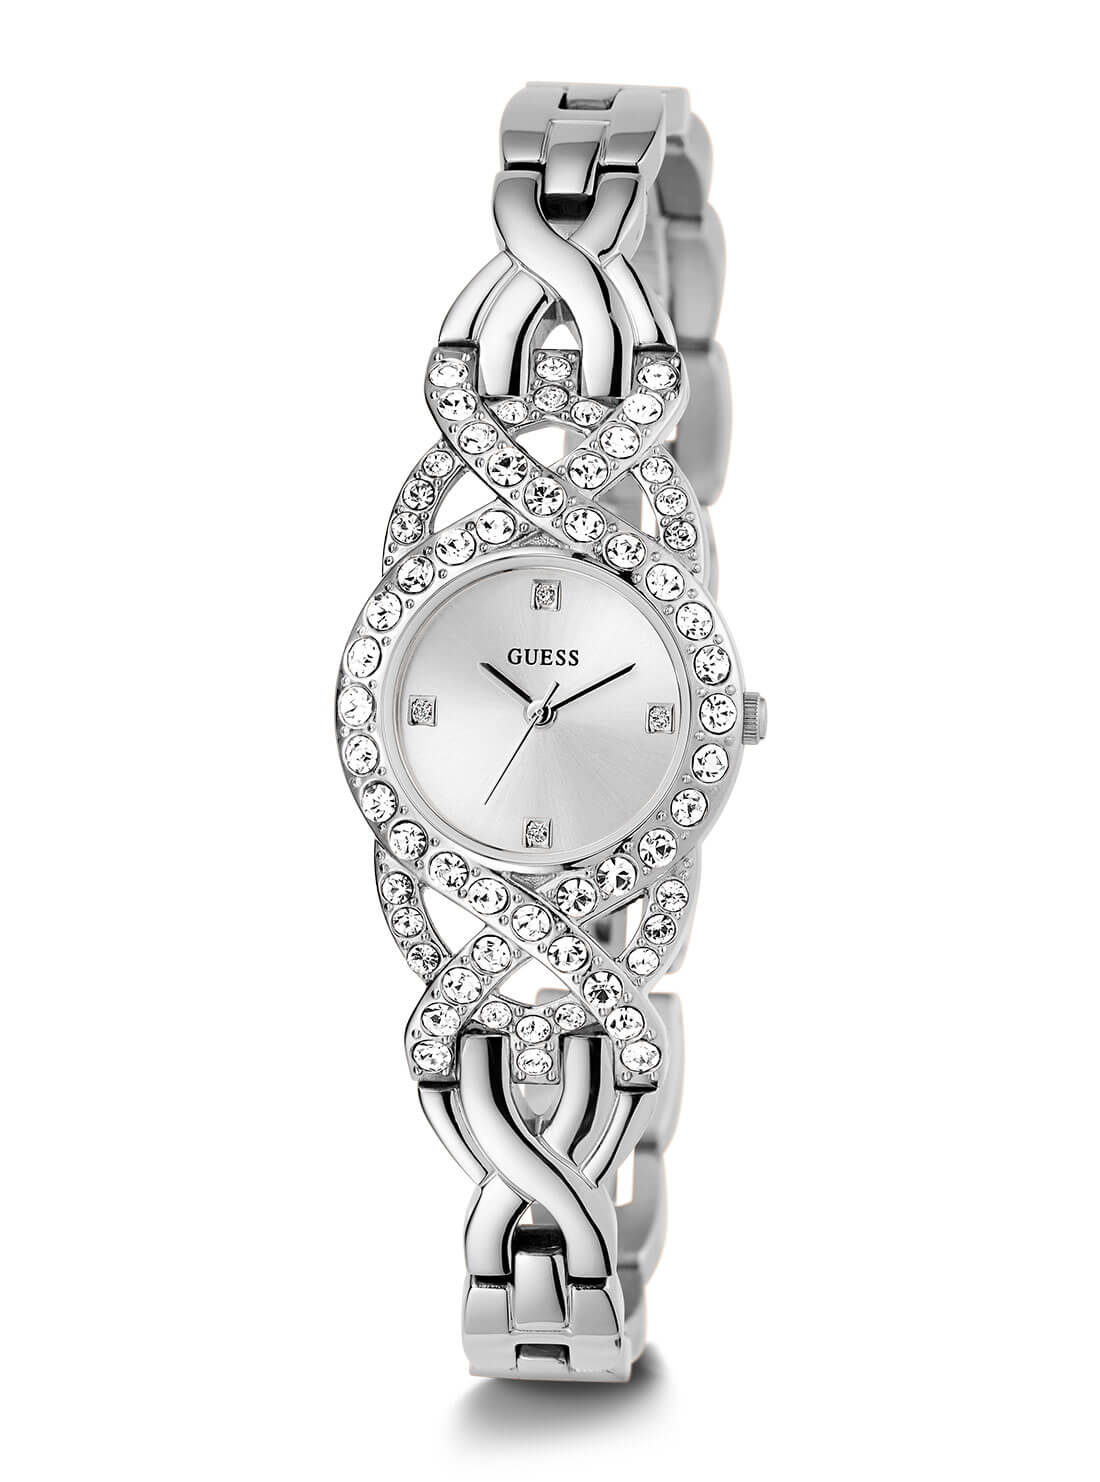 GUESS Silver Adorn Crystal Watch front view